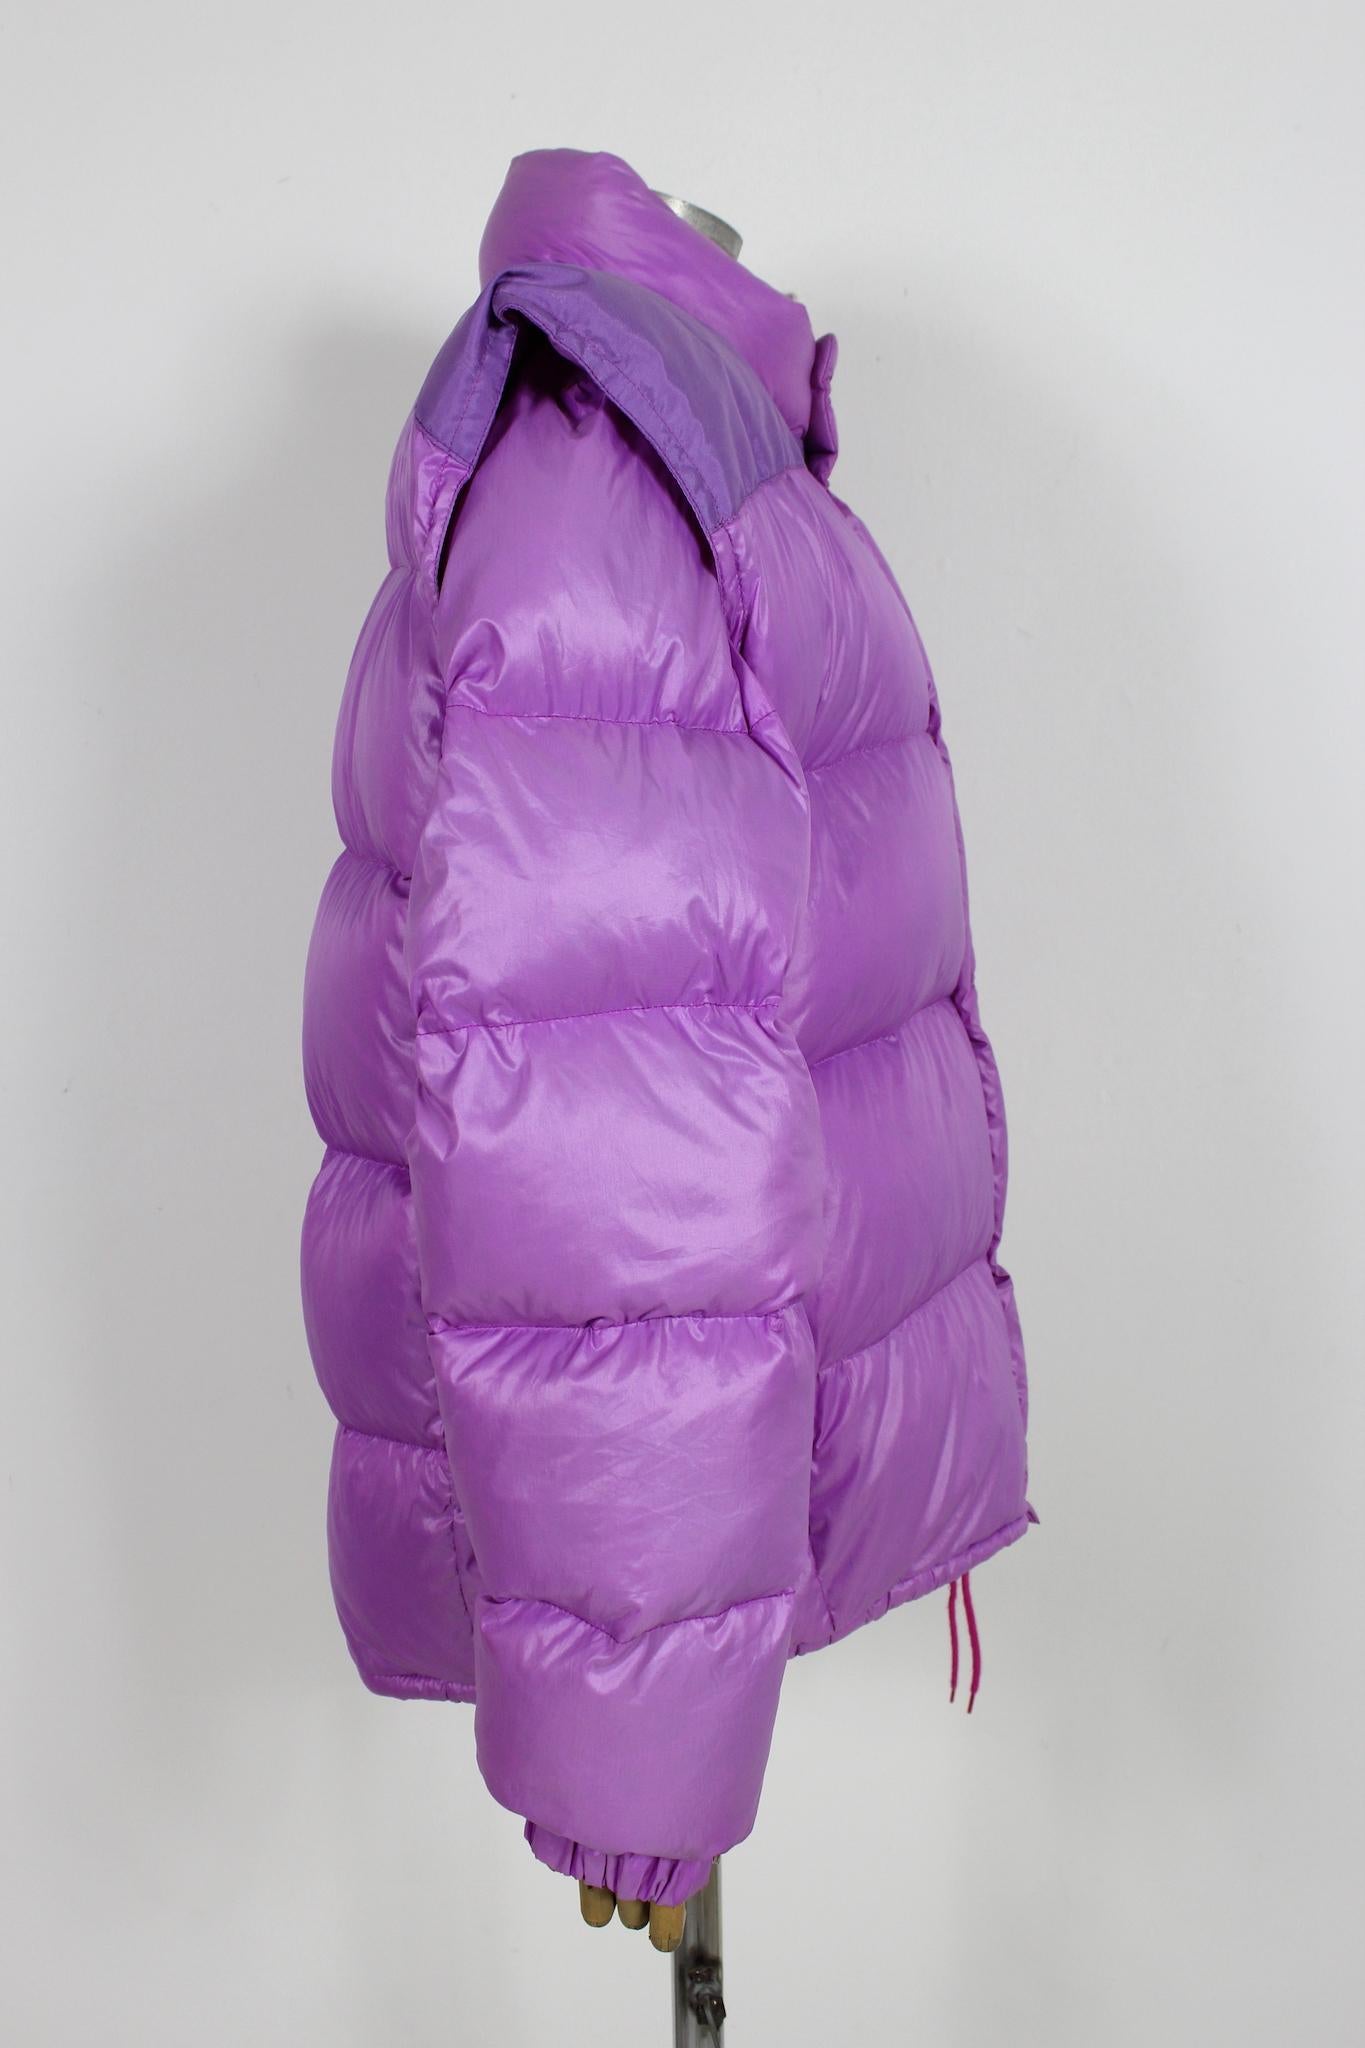 Moncler Grenoble Pink Goose Down Jacket 1980s Puffer Coat Vintage In Good Condition For Sale In Brindisi, Bt